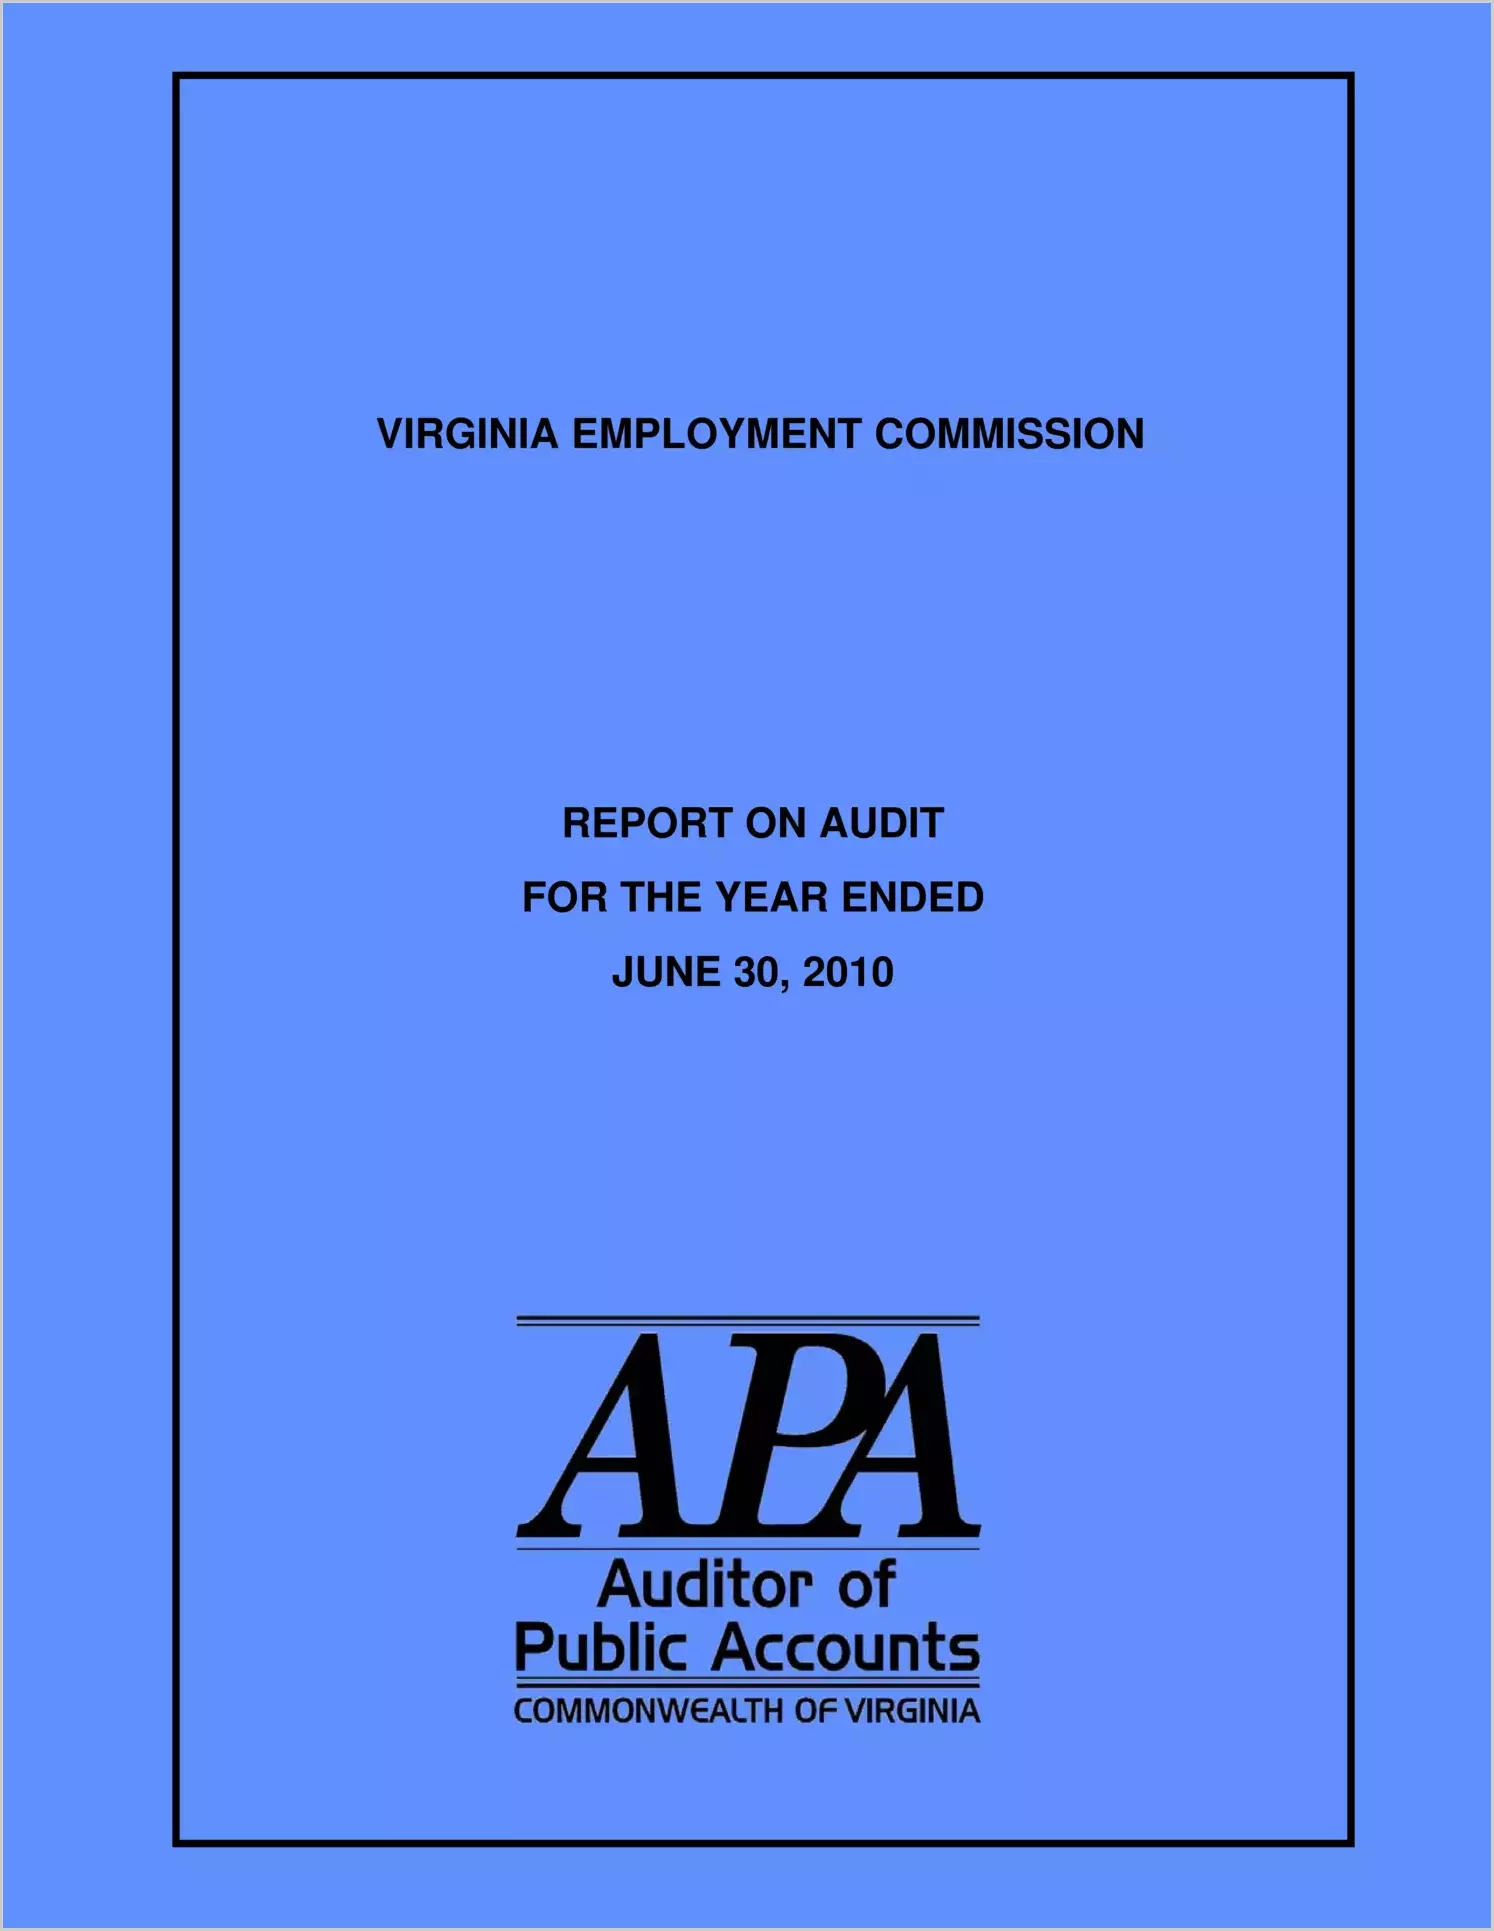 Virginia Employment Commission for the year ended June 30, 2010